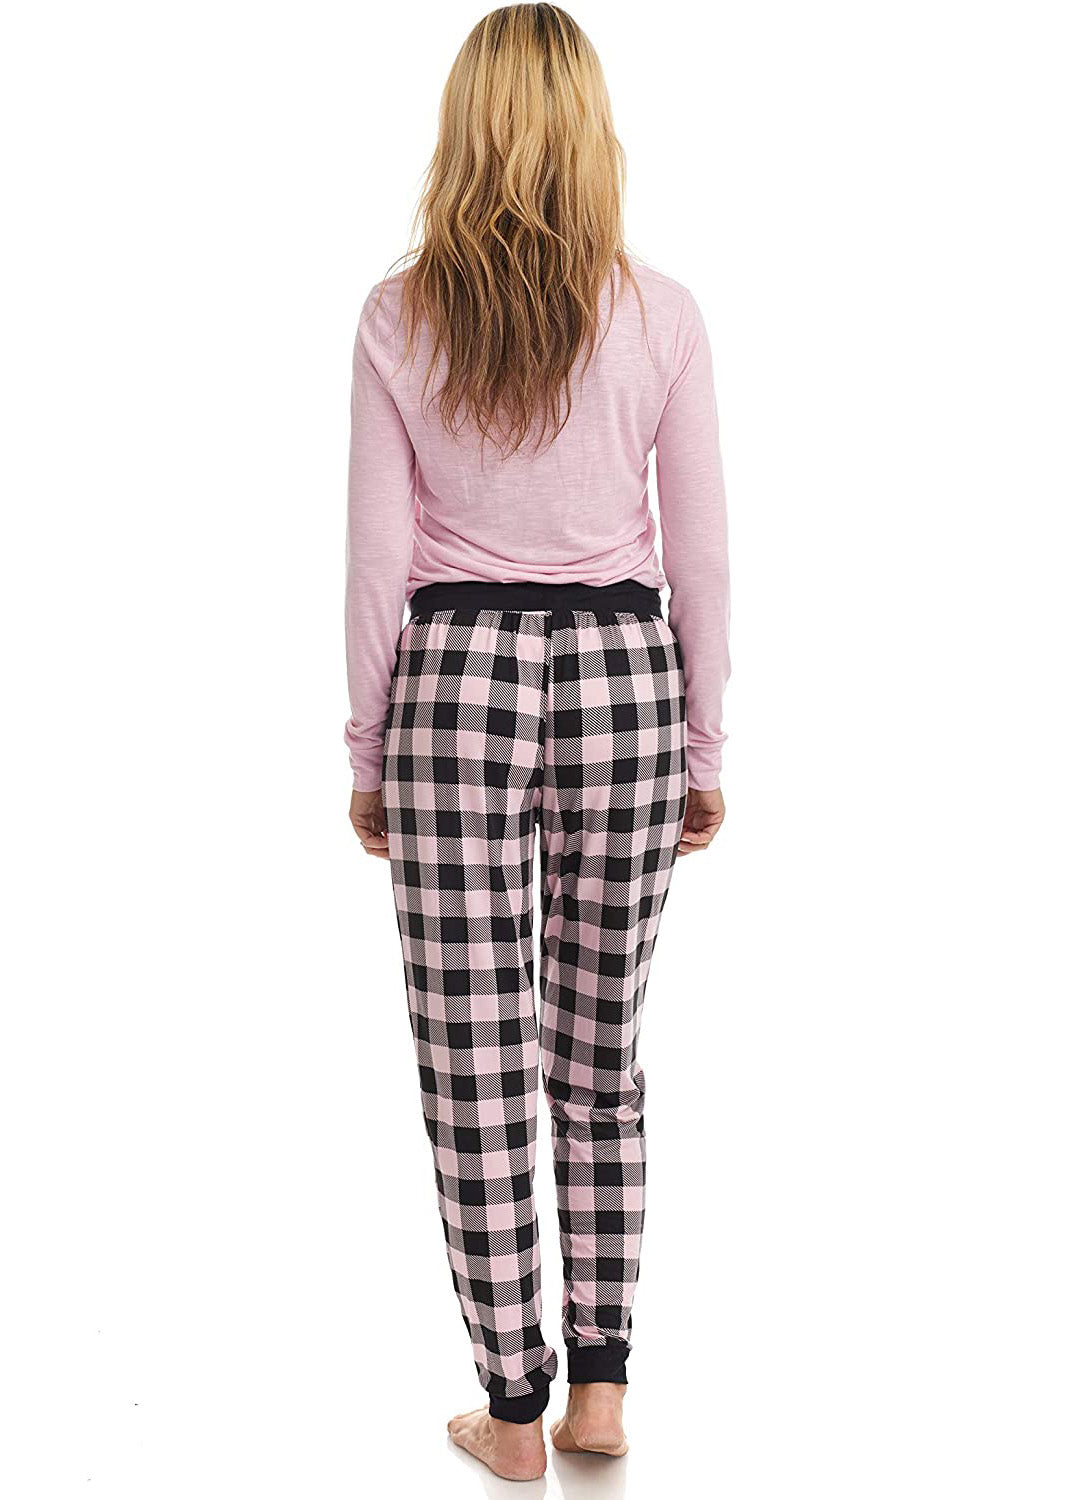 
                  
                    PJ joggers with soft velvety texture, stretch, elastic waistband, drawstring, and stylish ankle cuff. This pattern is a pink and black plaid with a black drawstring
                  
                